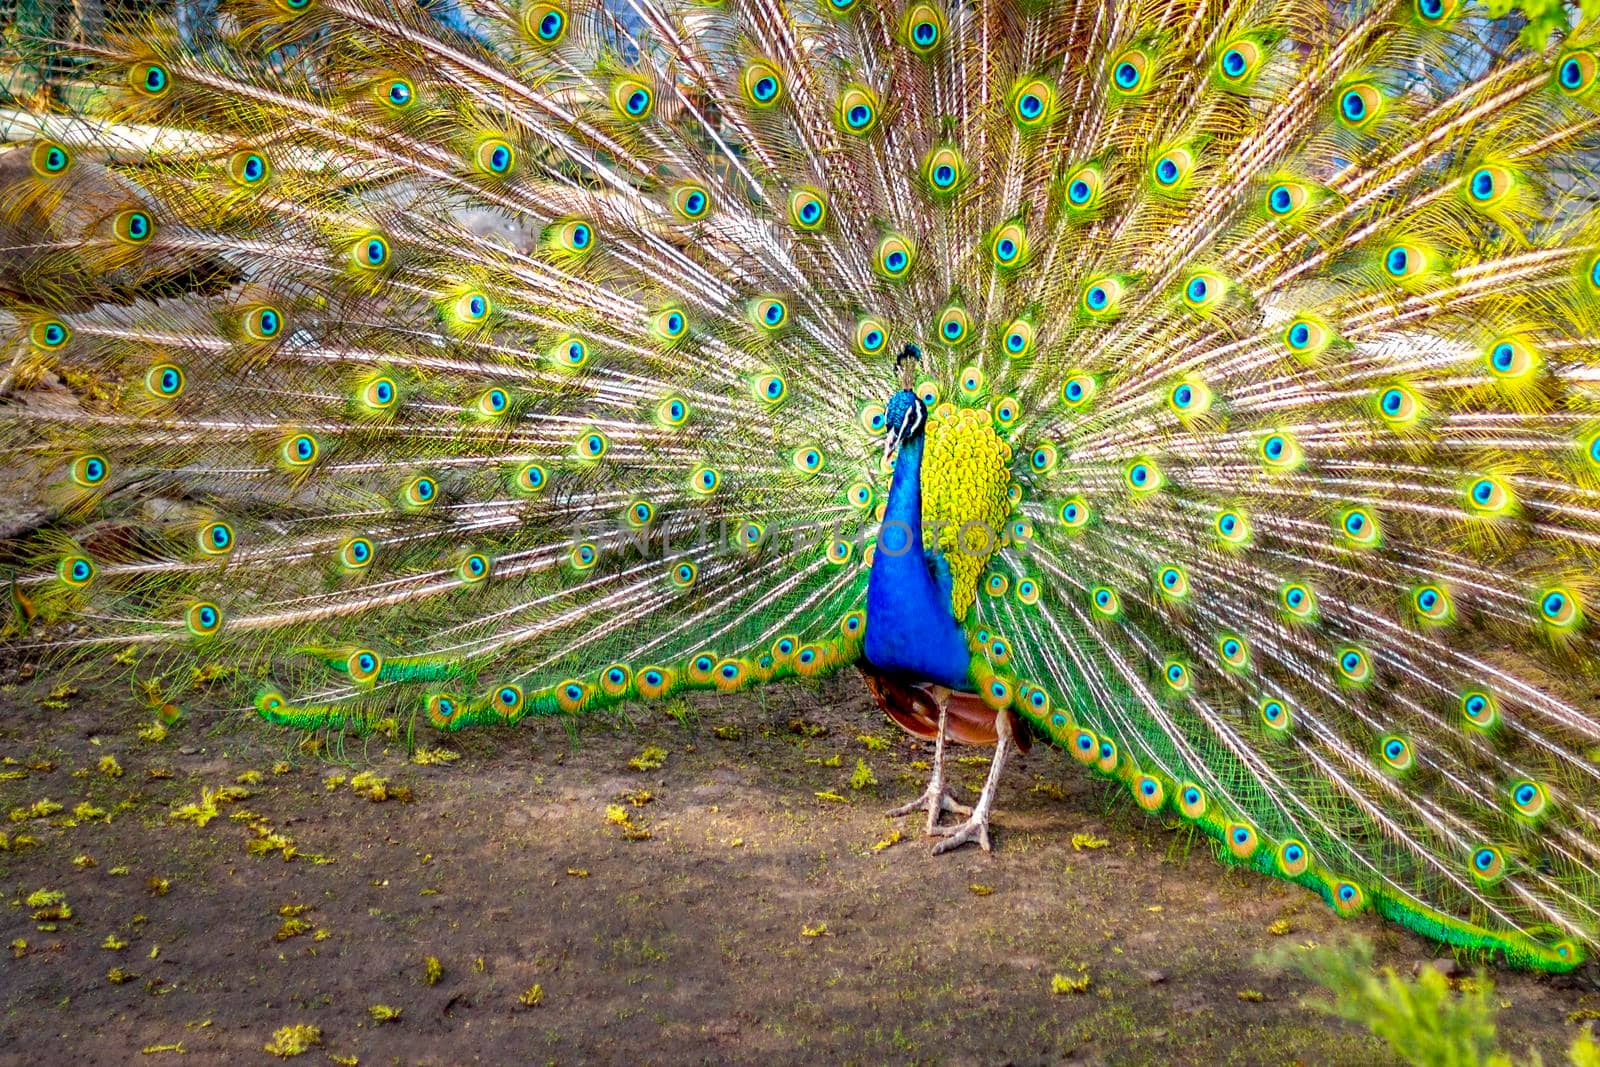 The peacock opened its multicolored tail like a fan. Beautiful plumage of male peacock in mating season